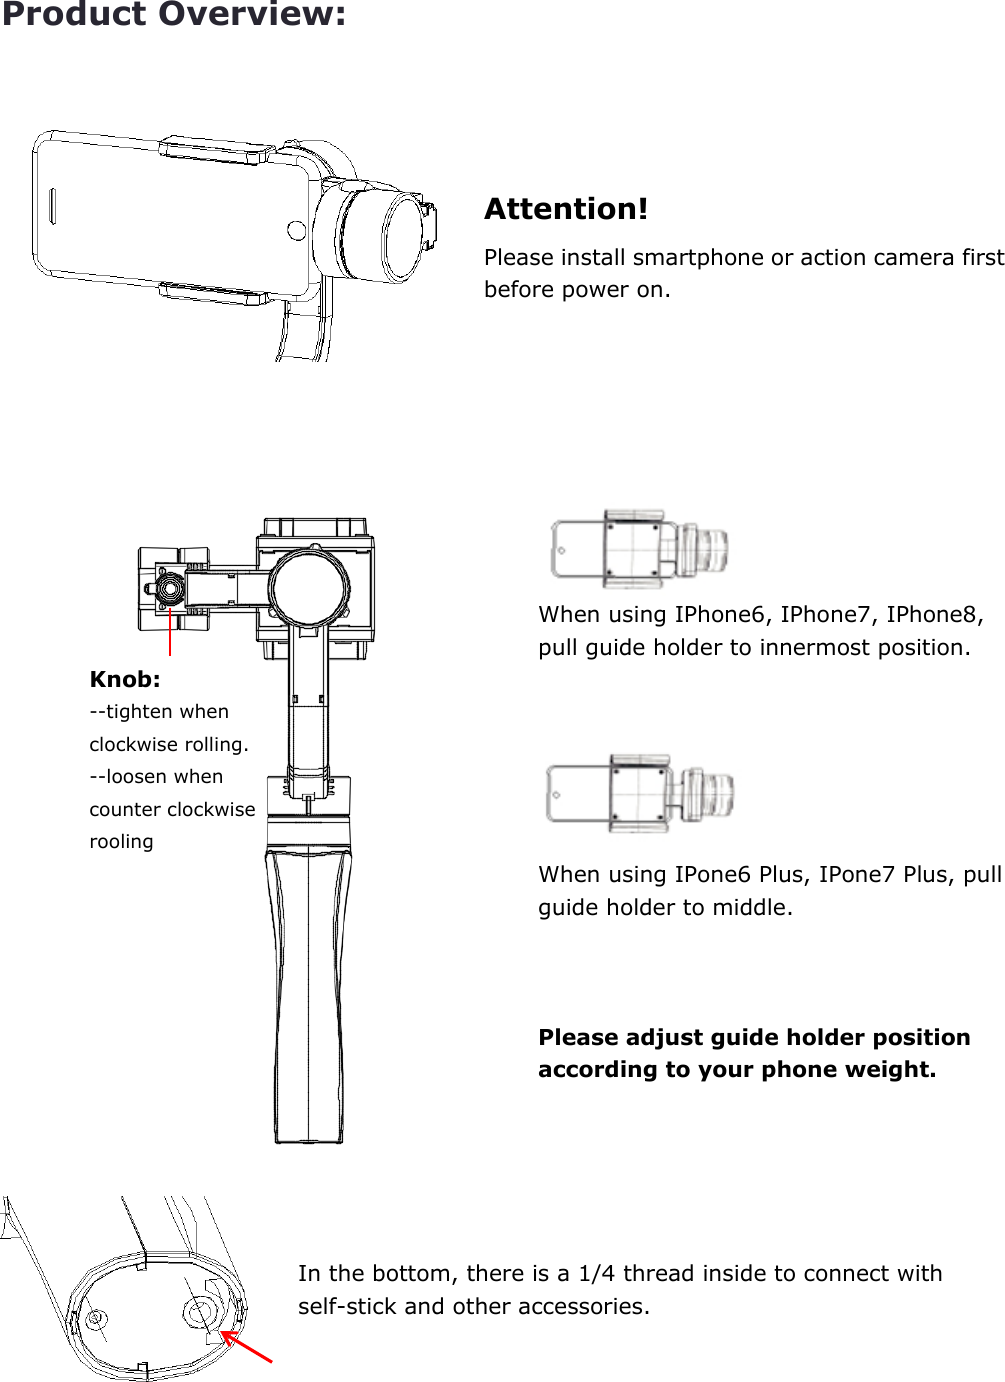 Product Overview:    Attention! Please install smartphone or action camera first before power on.        When using IPhone6, IPhone7, IPhone8, pull guide holder to innermost position.    When using IPone6 Plus, IPone7 Plus, pull guide holder to middle.    Please adjust guide holder position according to your phone weight.      In the bottom, there is a 1/4 thread inside to connect with self-stick and other accessories.    Knob: --tighten when clockwise rolling. --loosen when counter clockwise rooling 